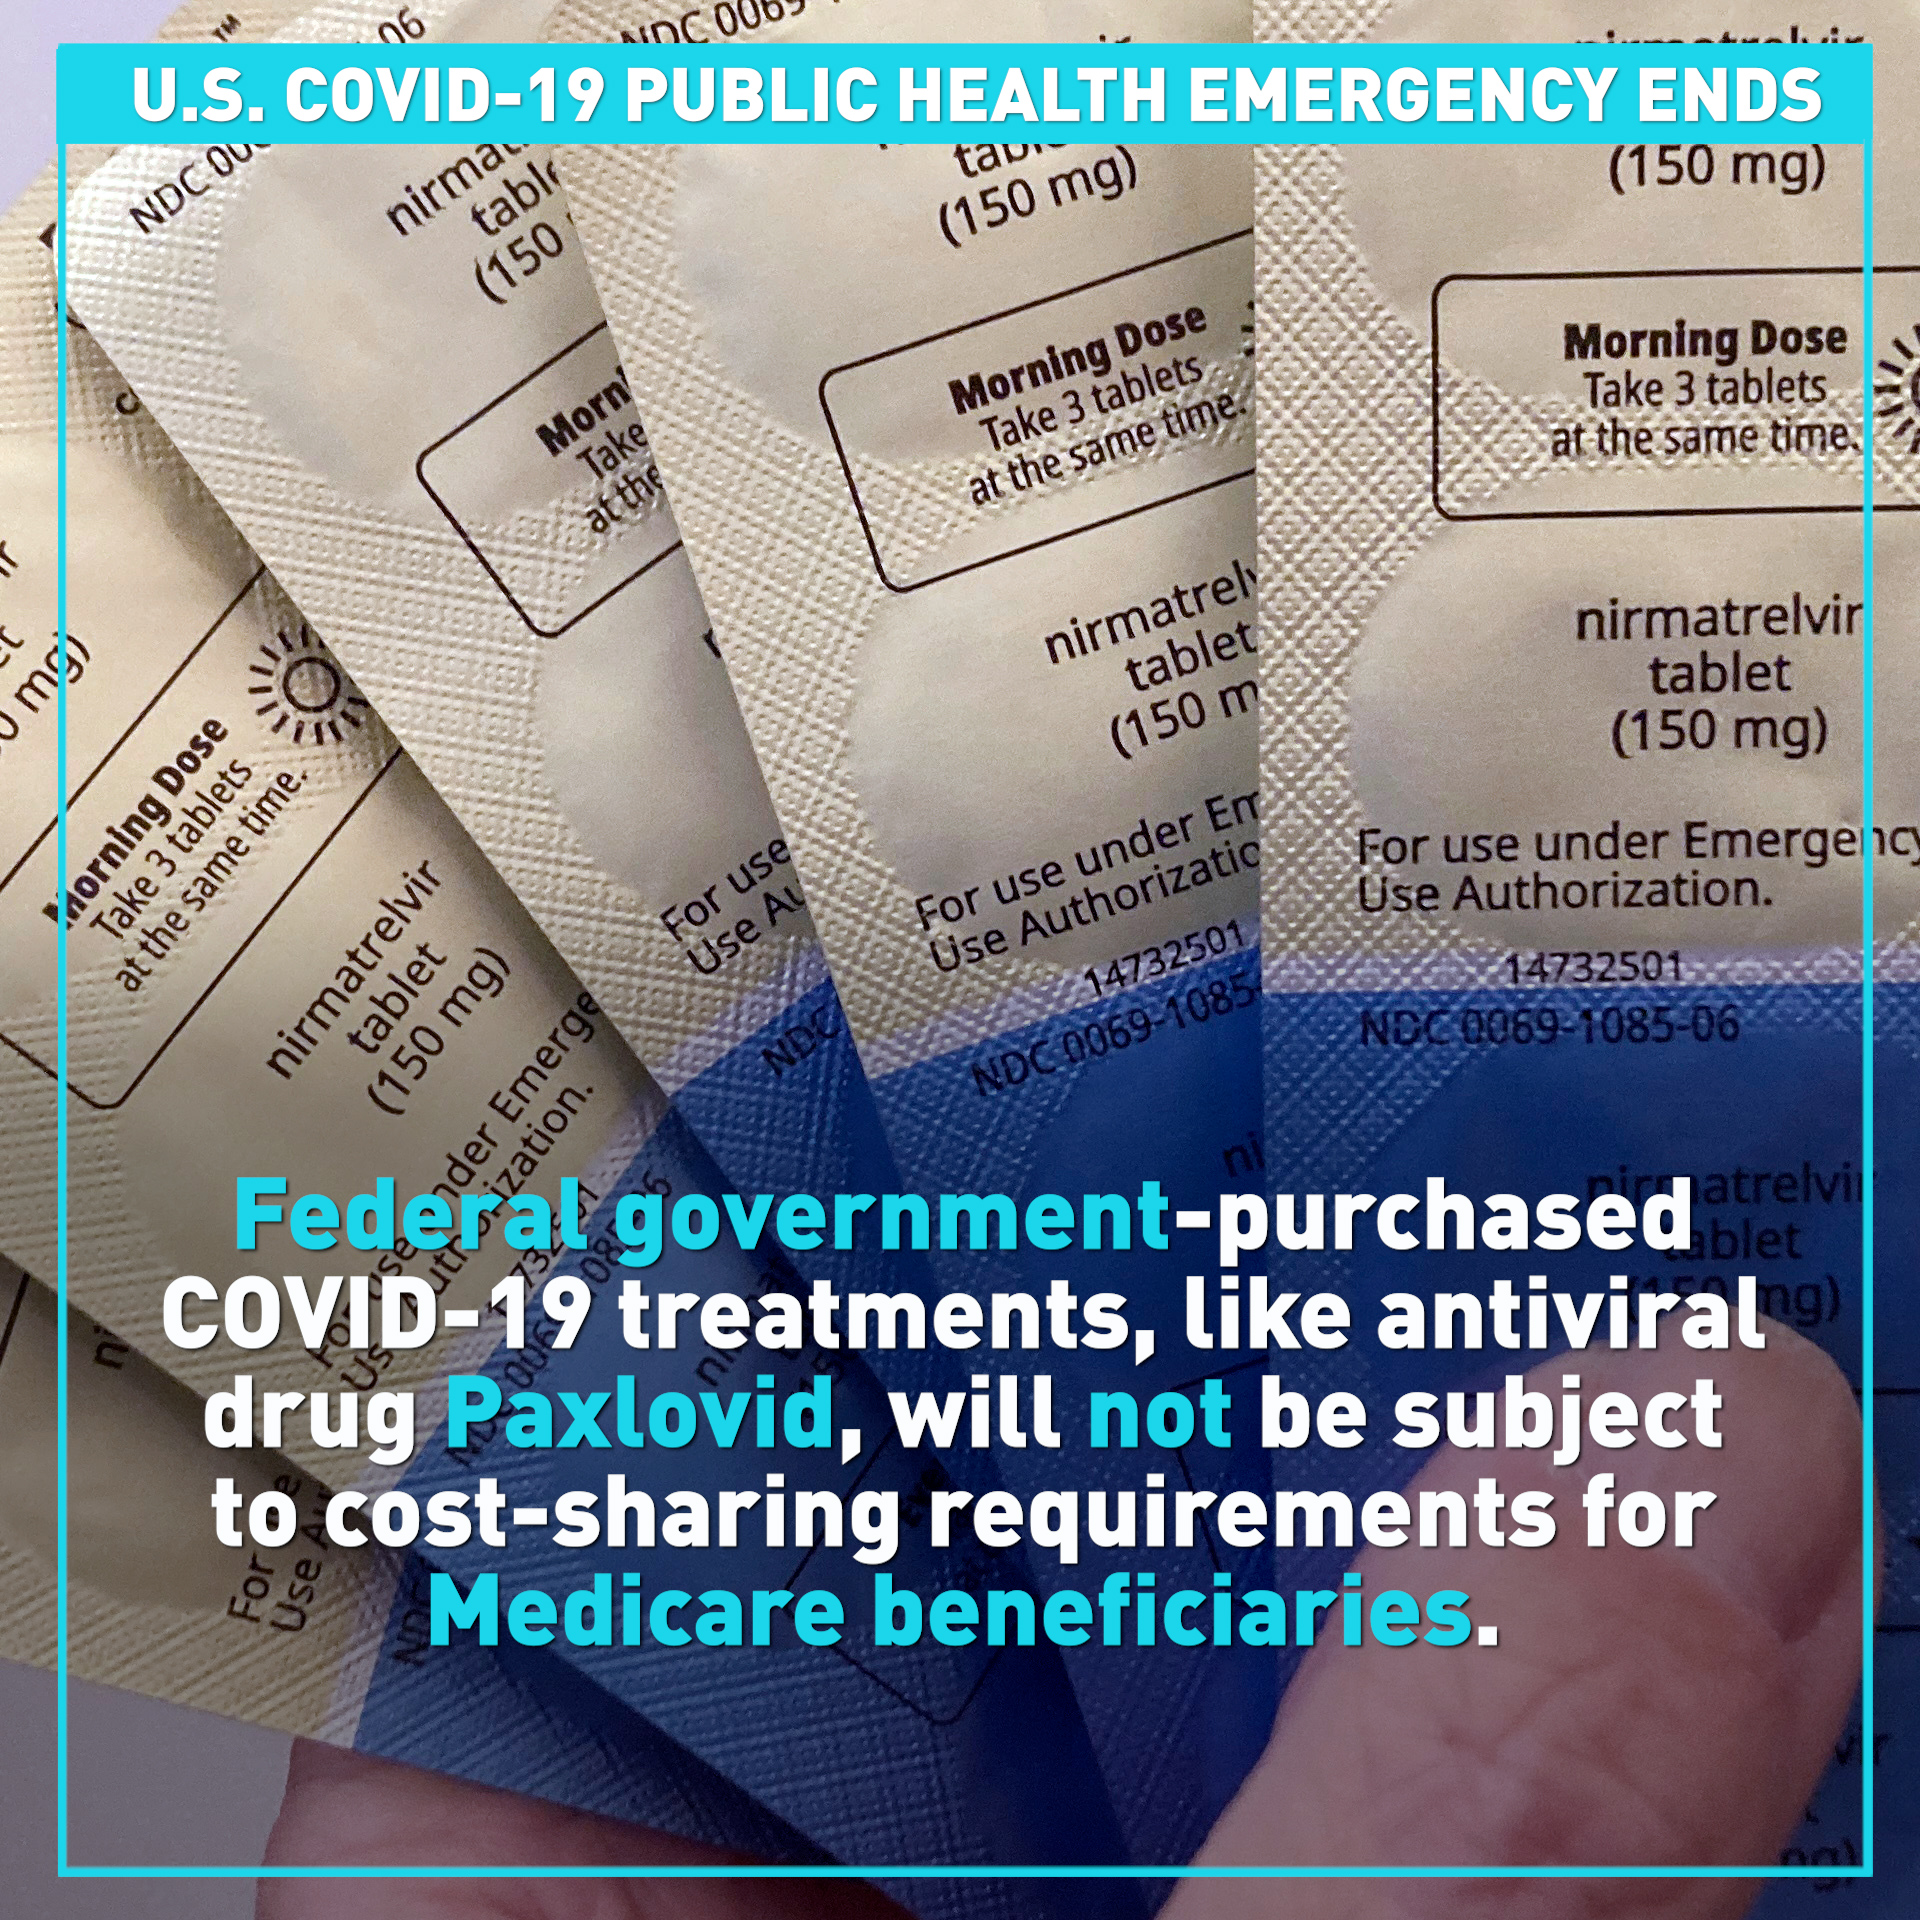 New rules to come with end of COVID-19 public health emergency in U.S. 